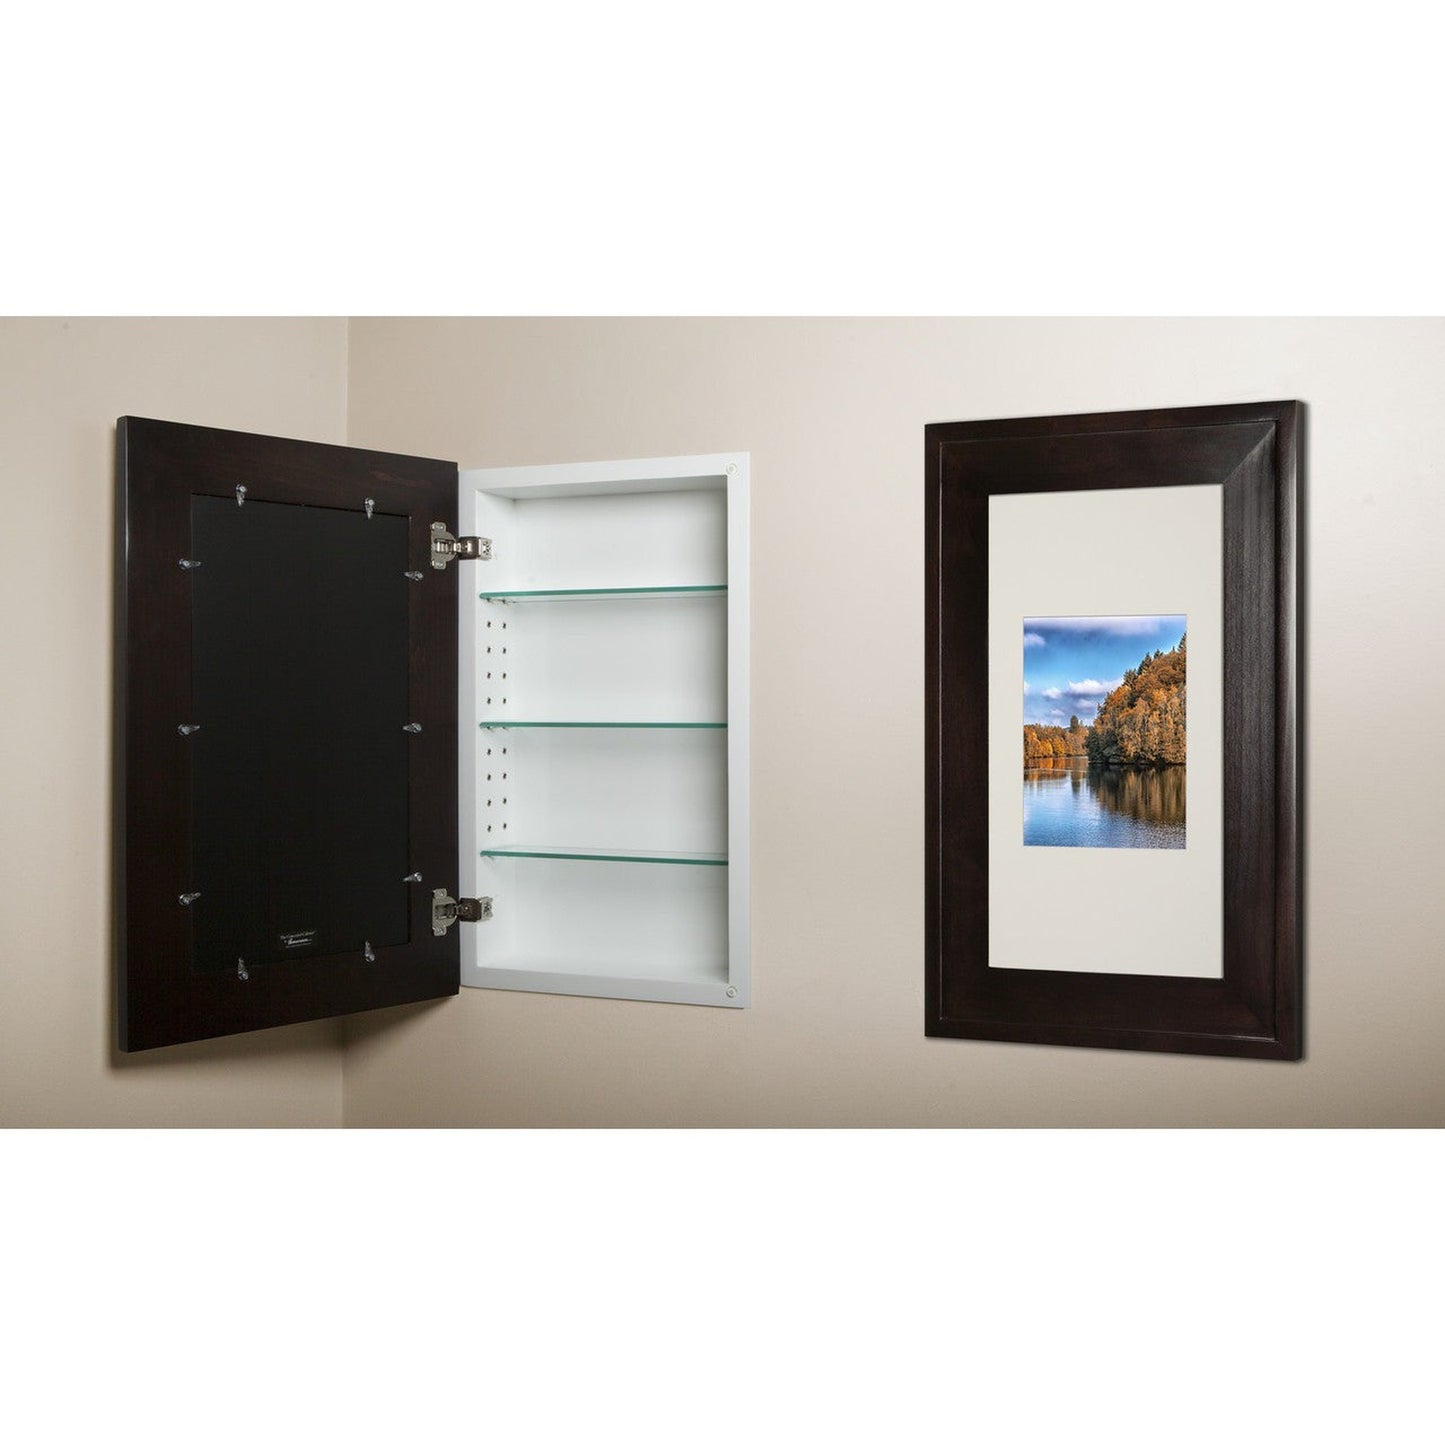 Fox Hollow Furnishings 14" x 24" Coffee Bean Extra Large Natural Interior Standard Depth Recessed Picture Frame Medicine Cabinet